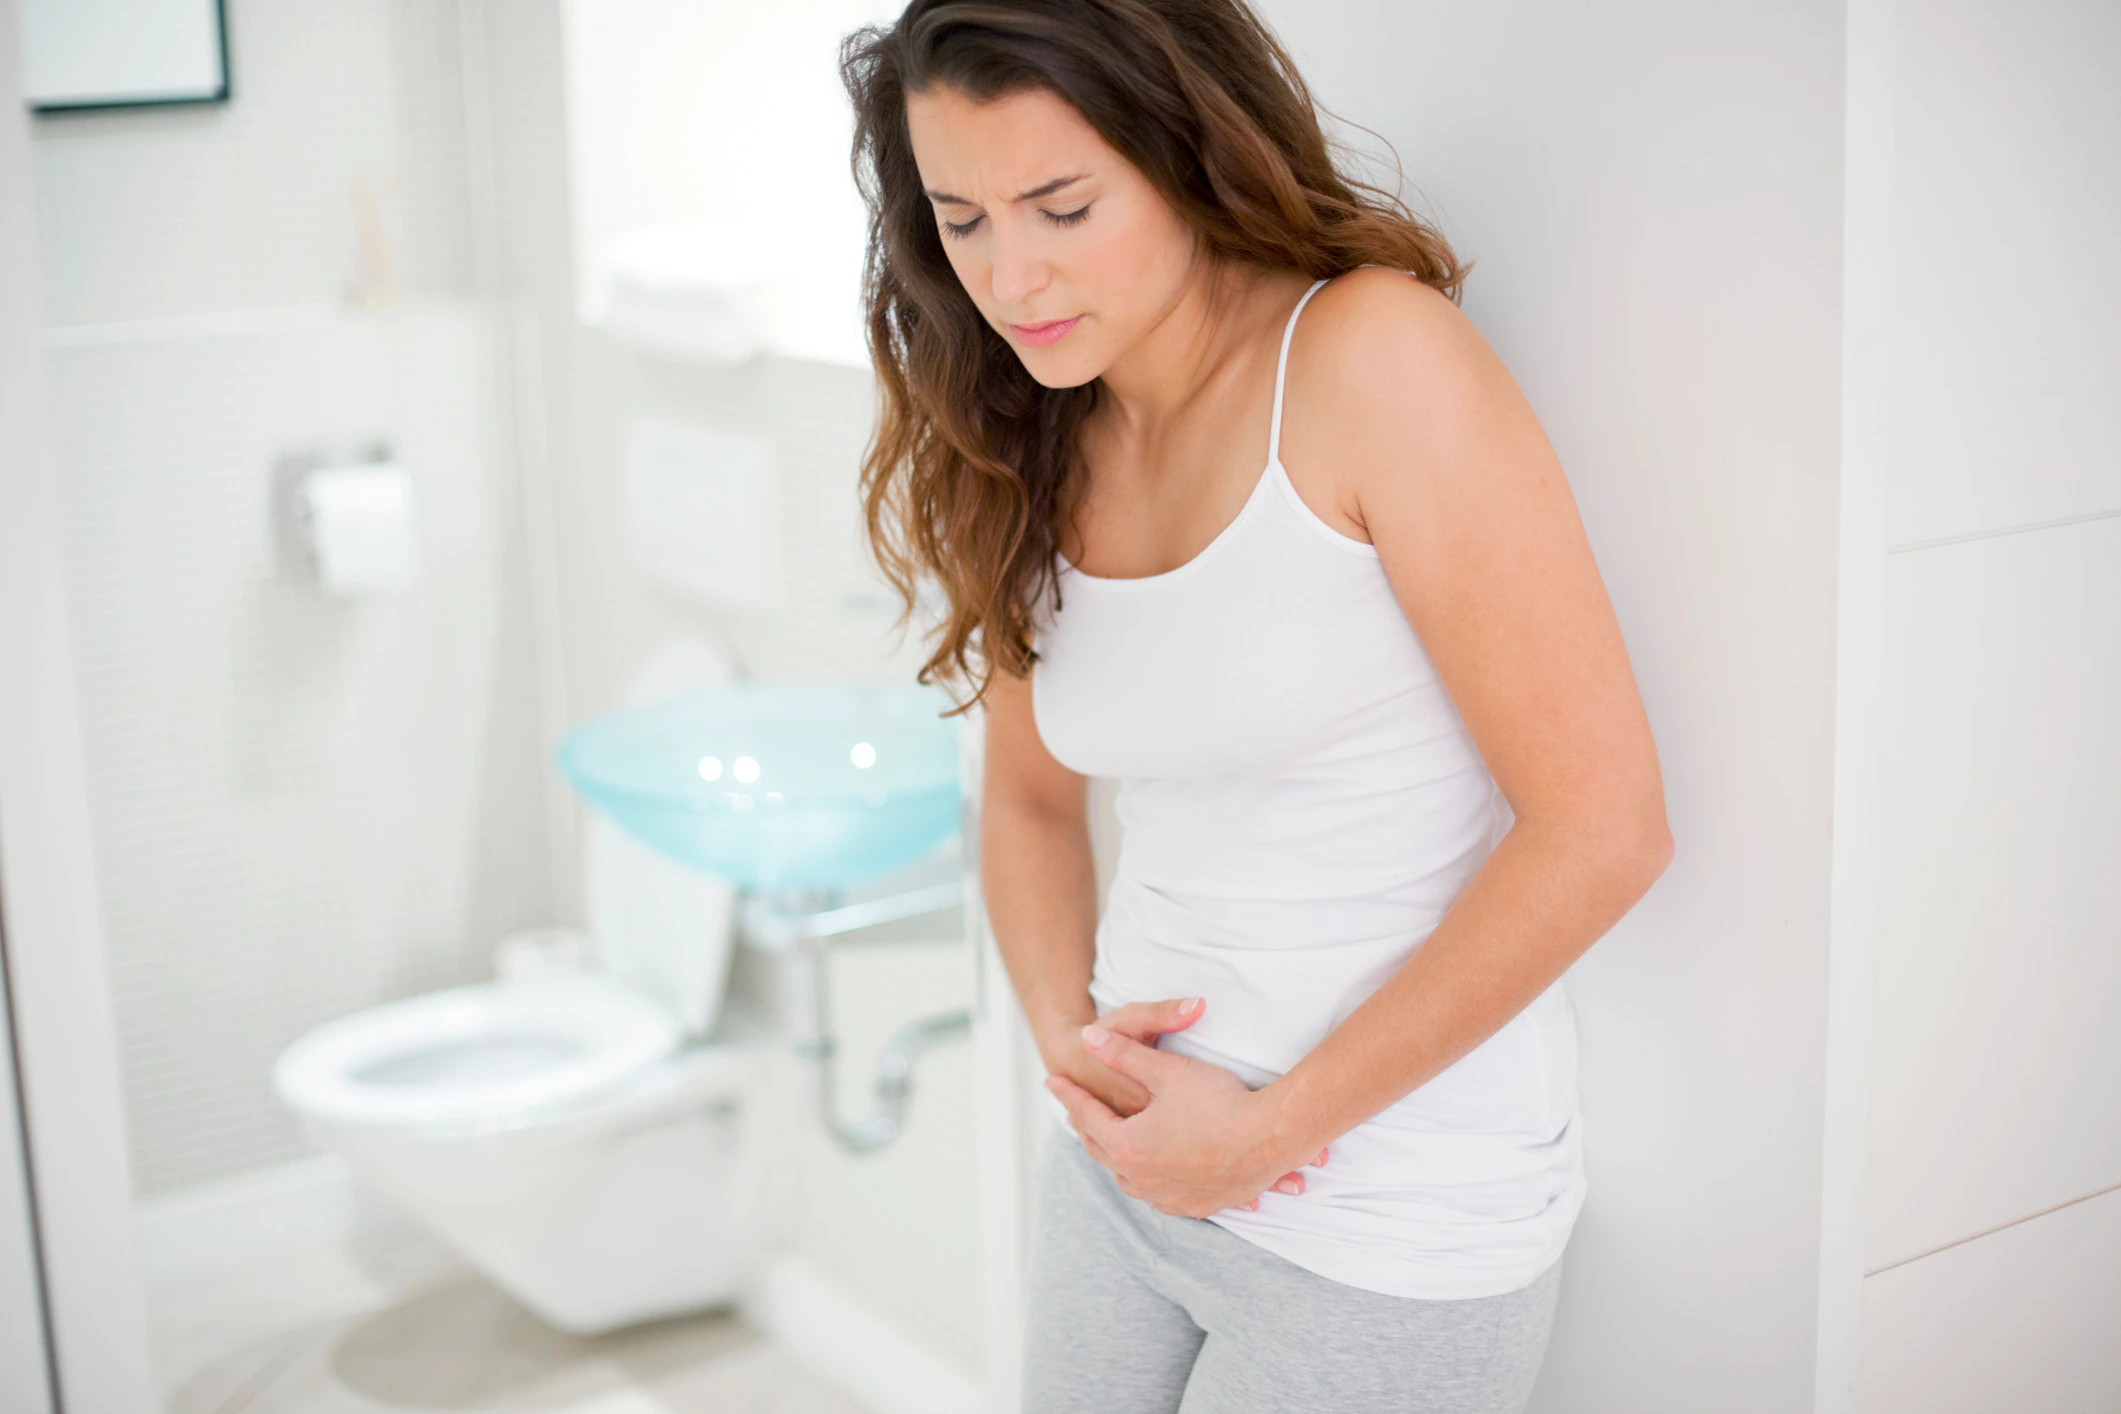 What are the Symptoms of Diarrhea for a Week and the Treatment for Diarrhea for a Week?